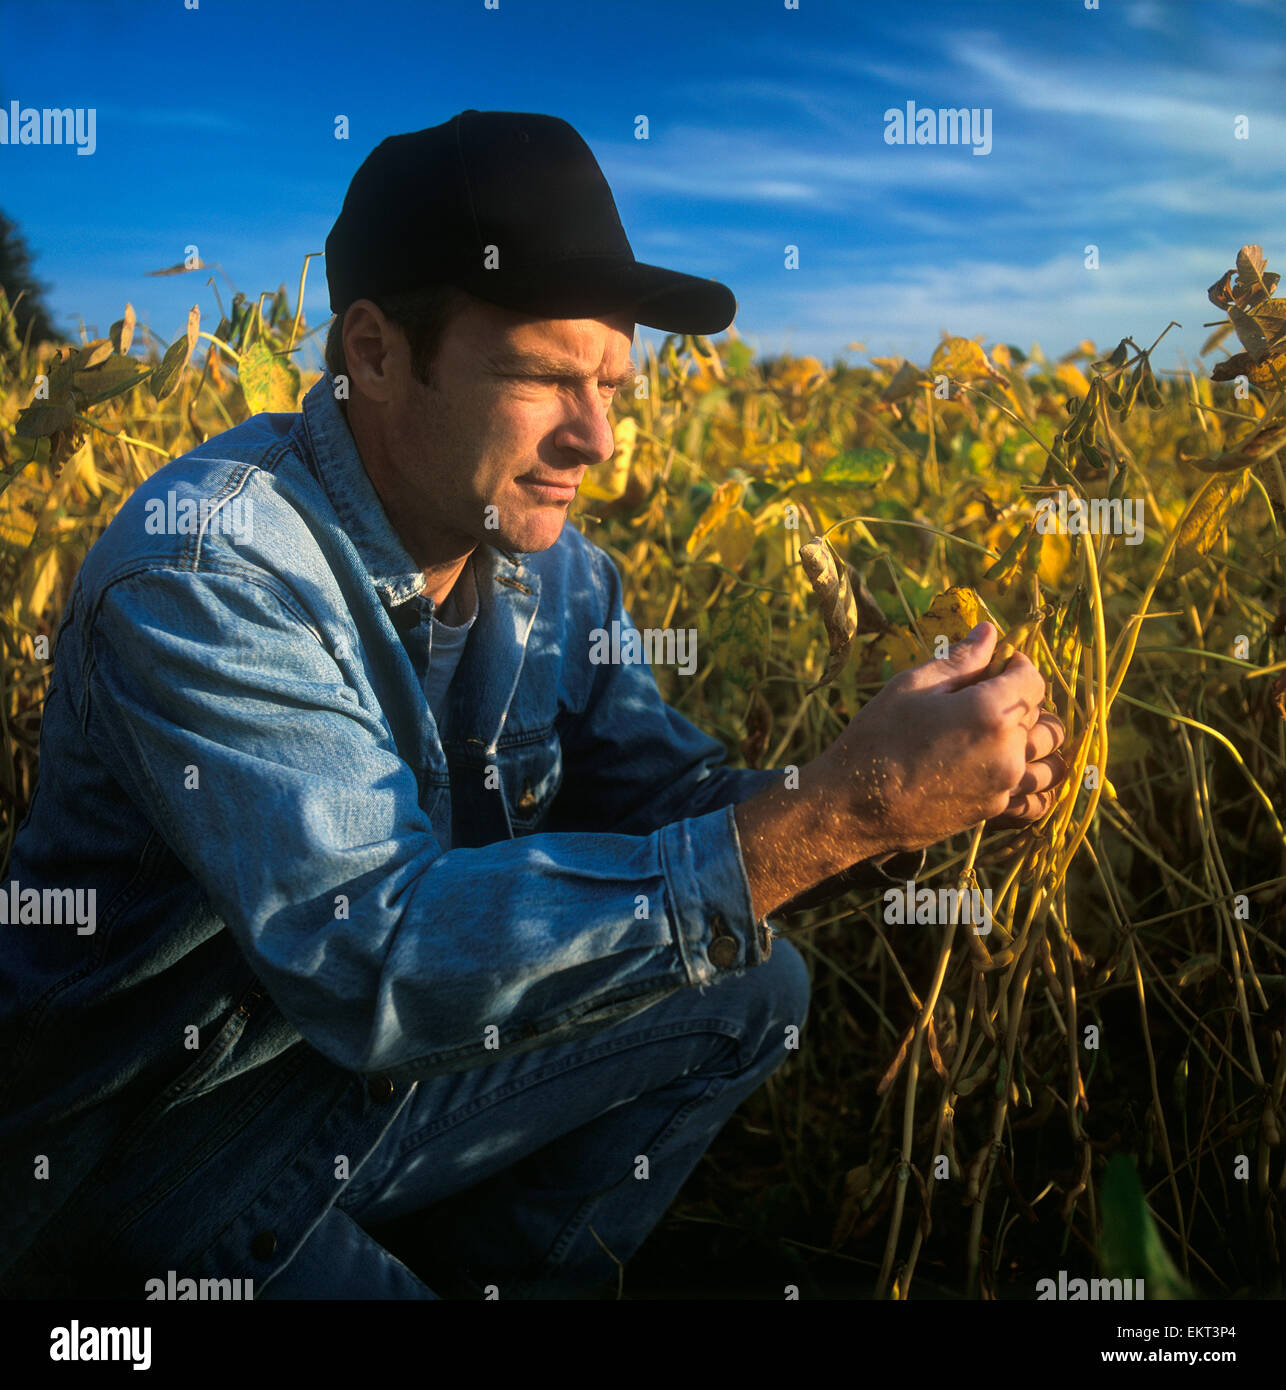 Agriculture - A farmer inspects ripening soybean pods to determine when the harvest will begin / Ontario, Canada. Stock Photo